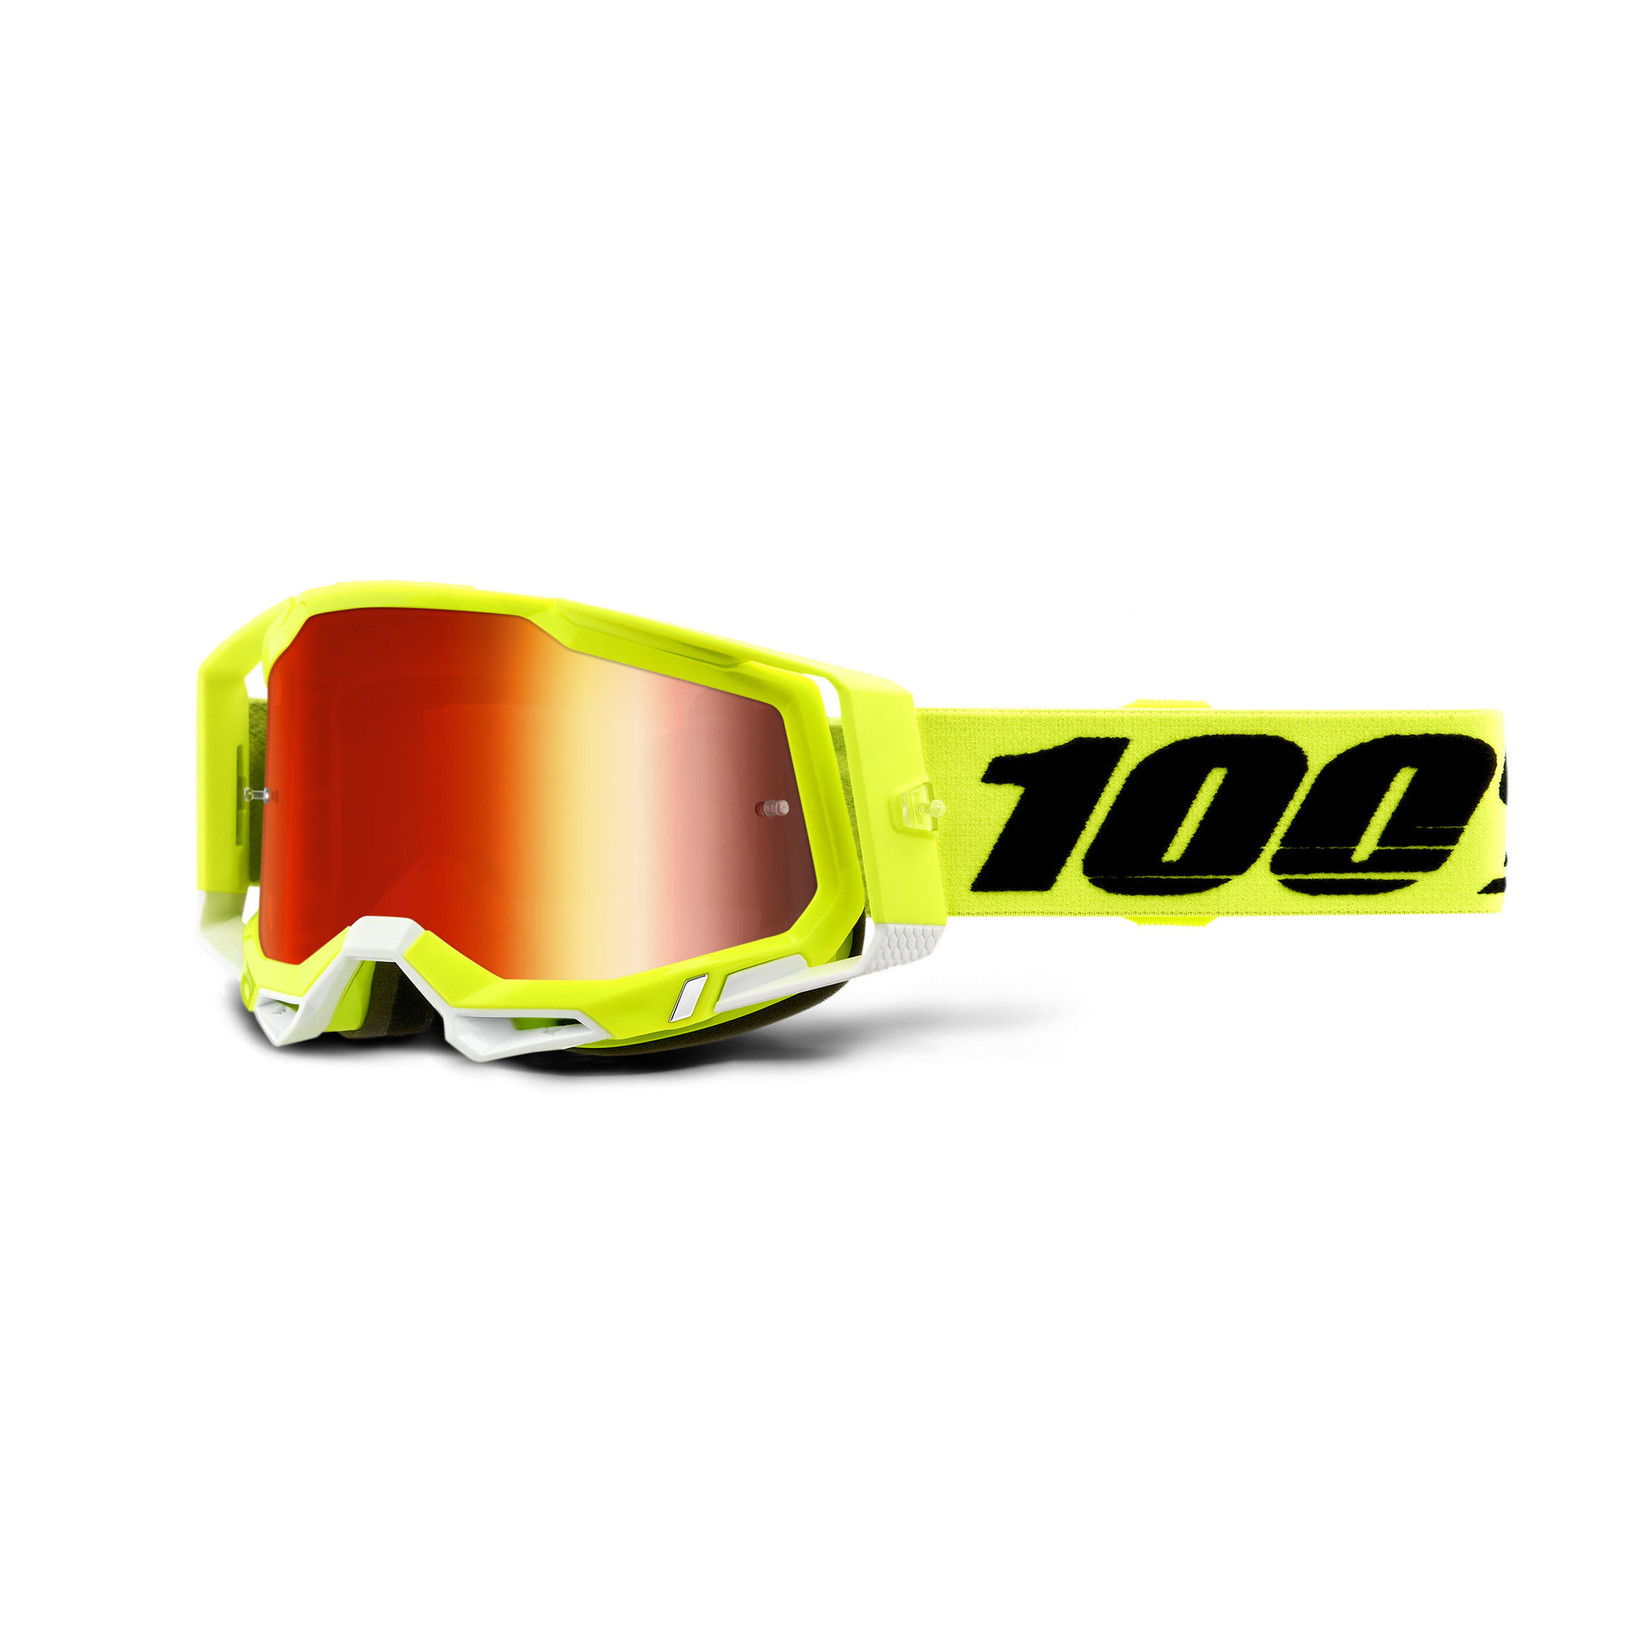 100 Percent 100% Racecraft 2 Goggle 45mm - Polycarbonate Lens Yellow - Mirror Red